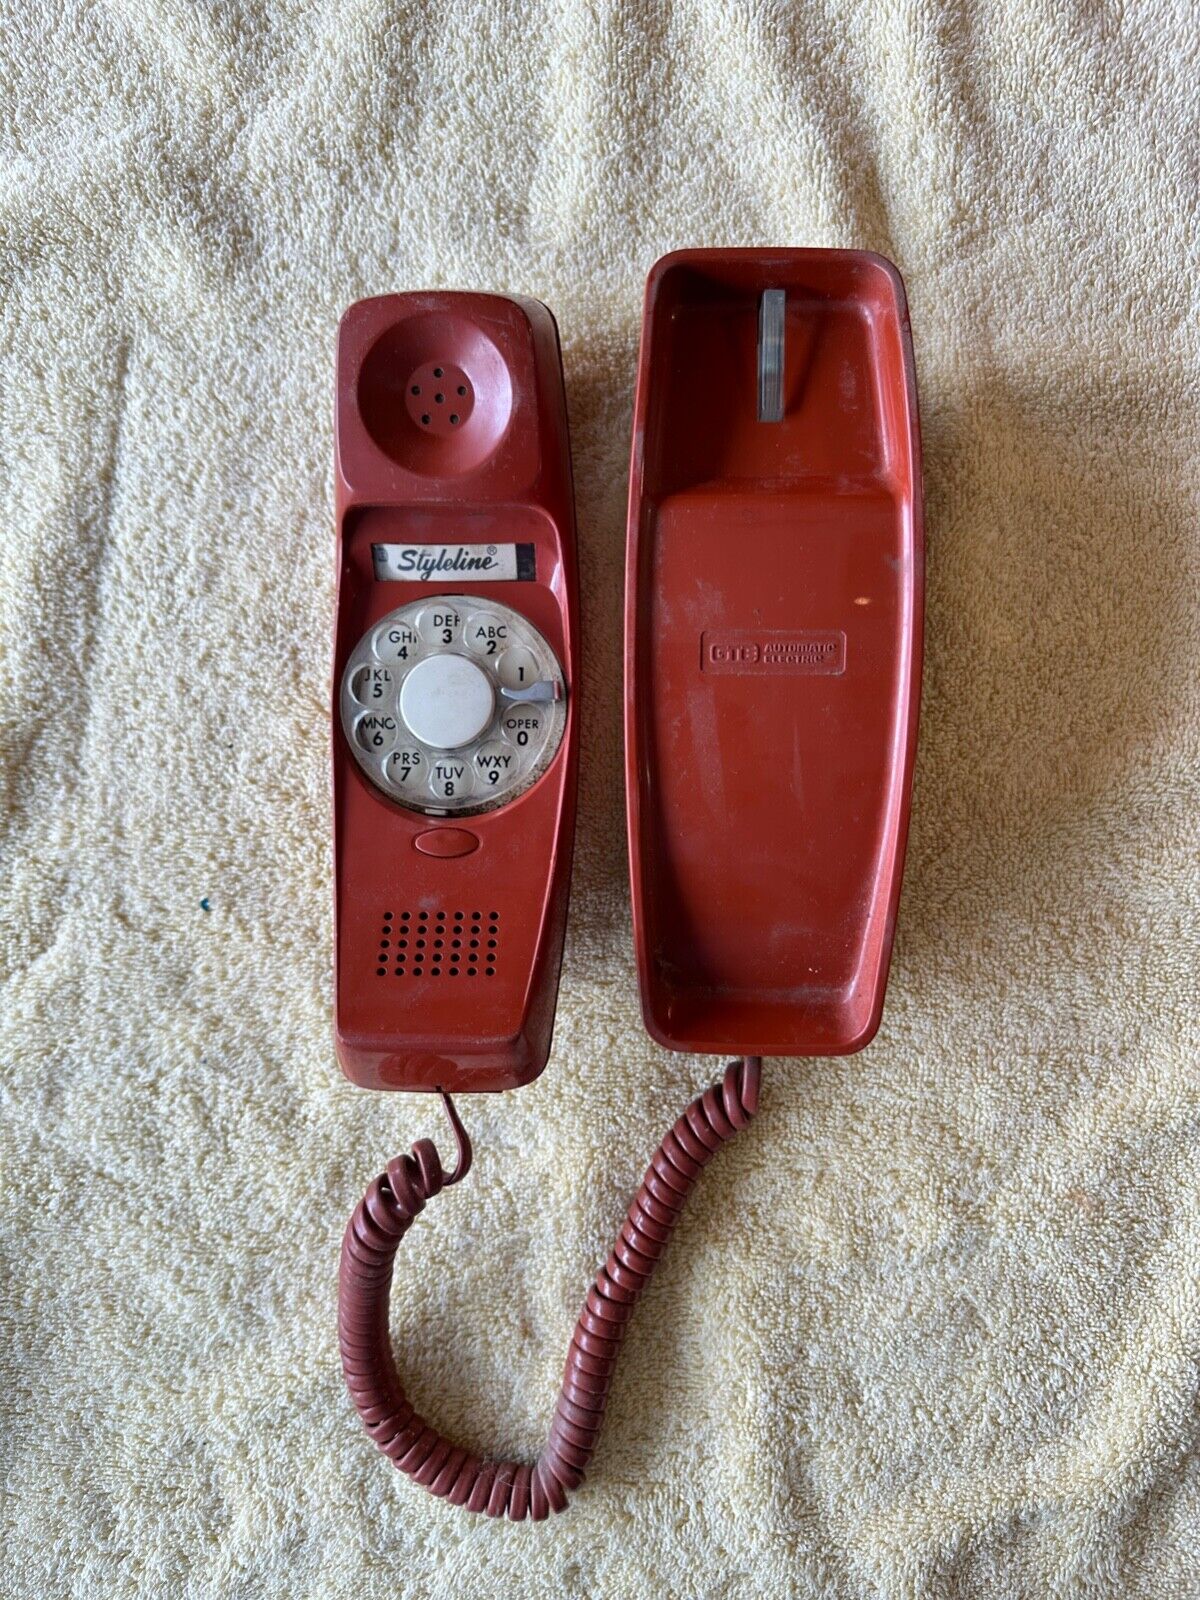 1970s GTE Automatic Electric Rotary Dial Styleline Wall Mount Telephone Red VTG